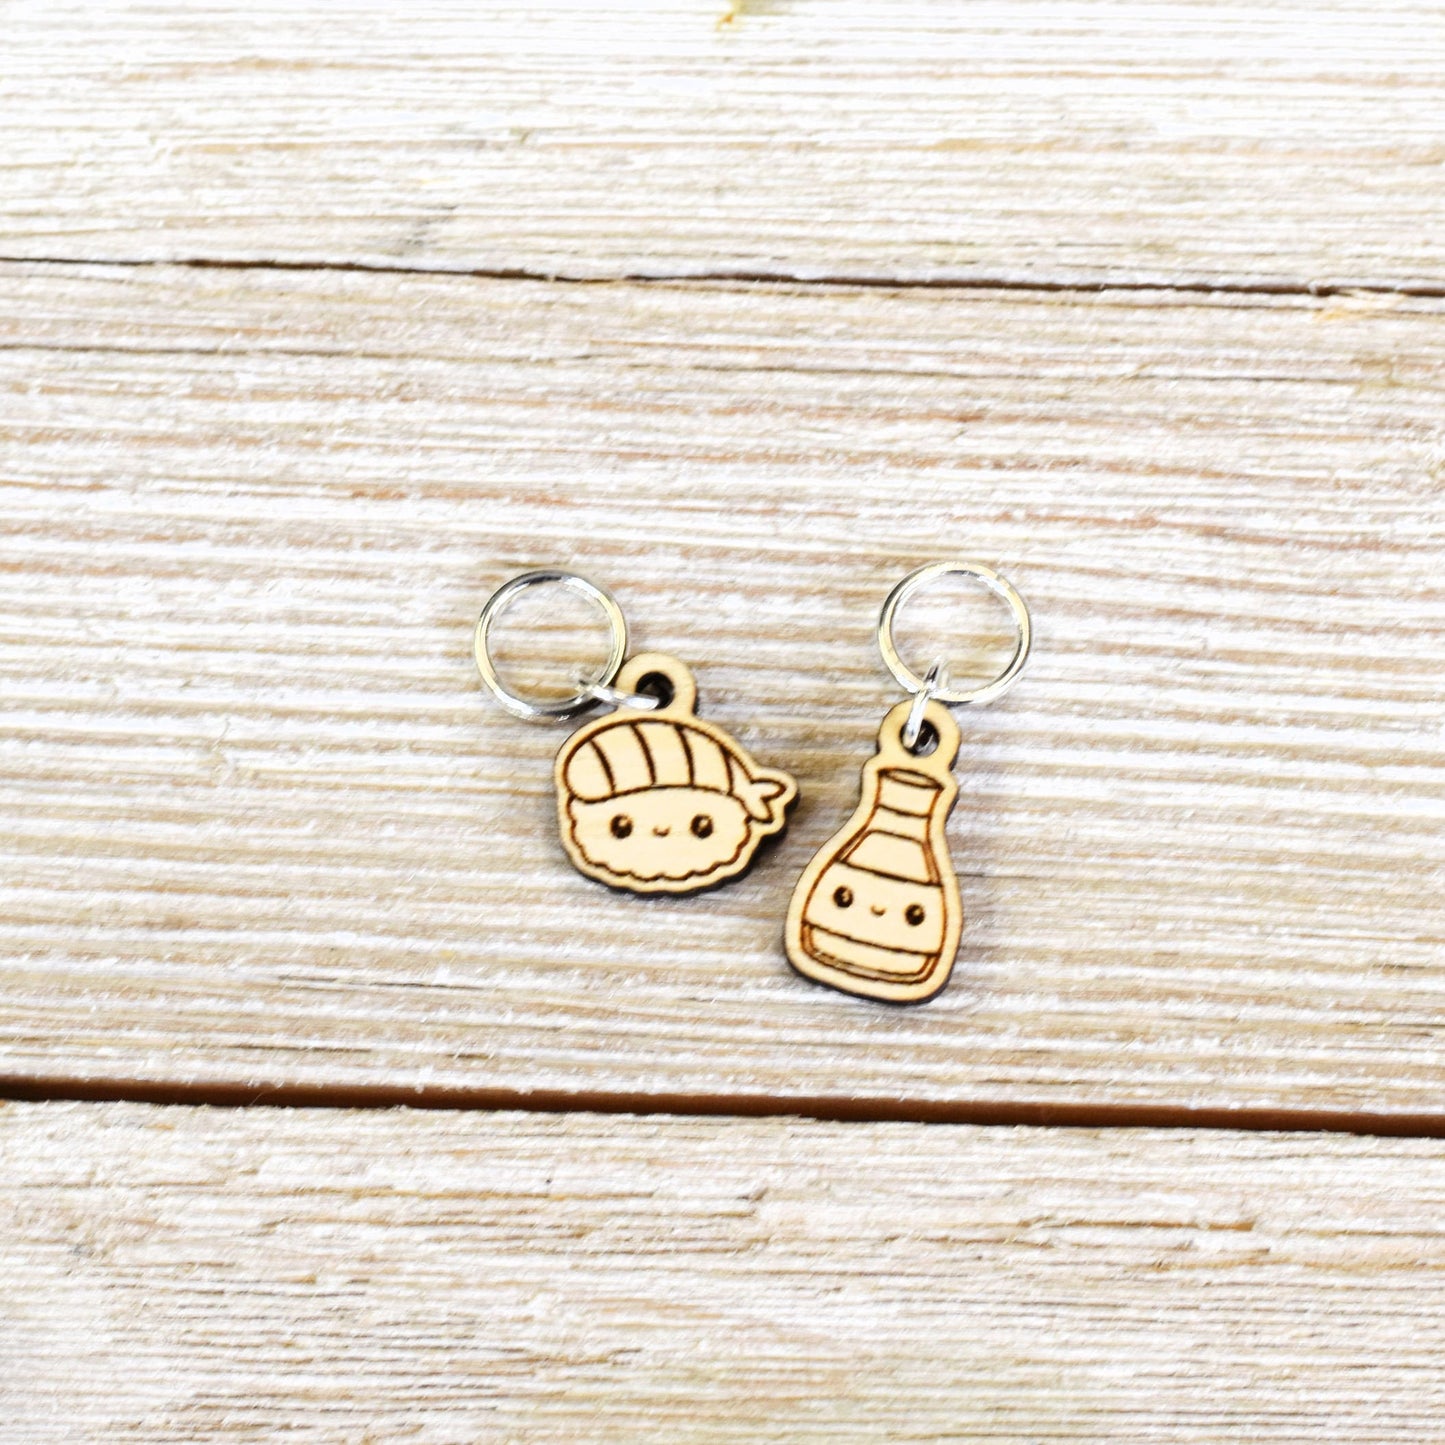 Set of 2 Laser Engraved Stitch Markers - Kawaii Soy Sauce and Sushi